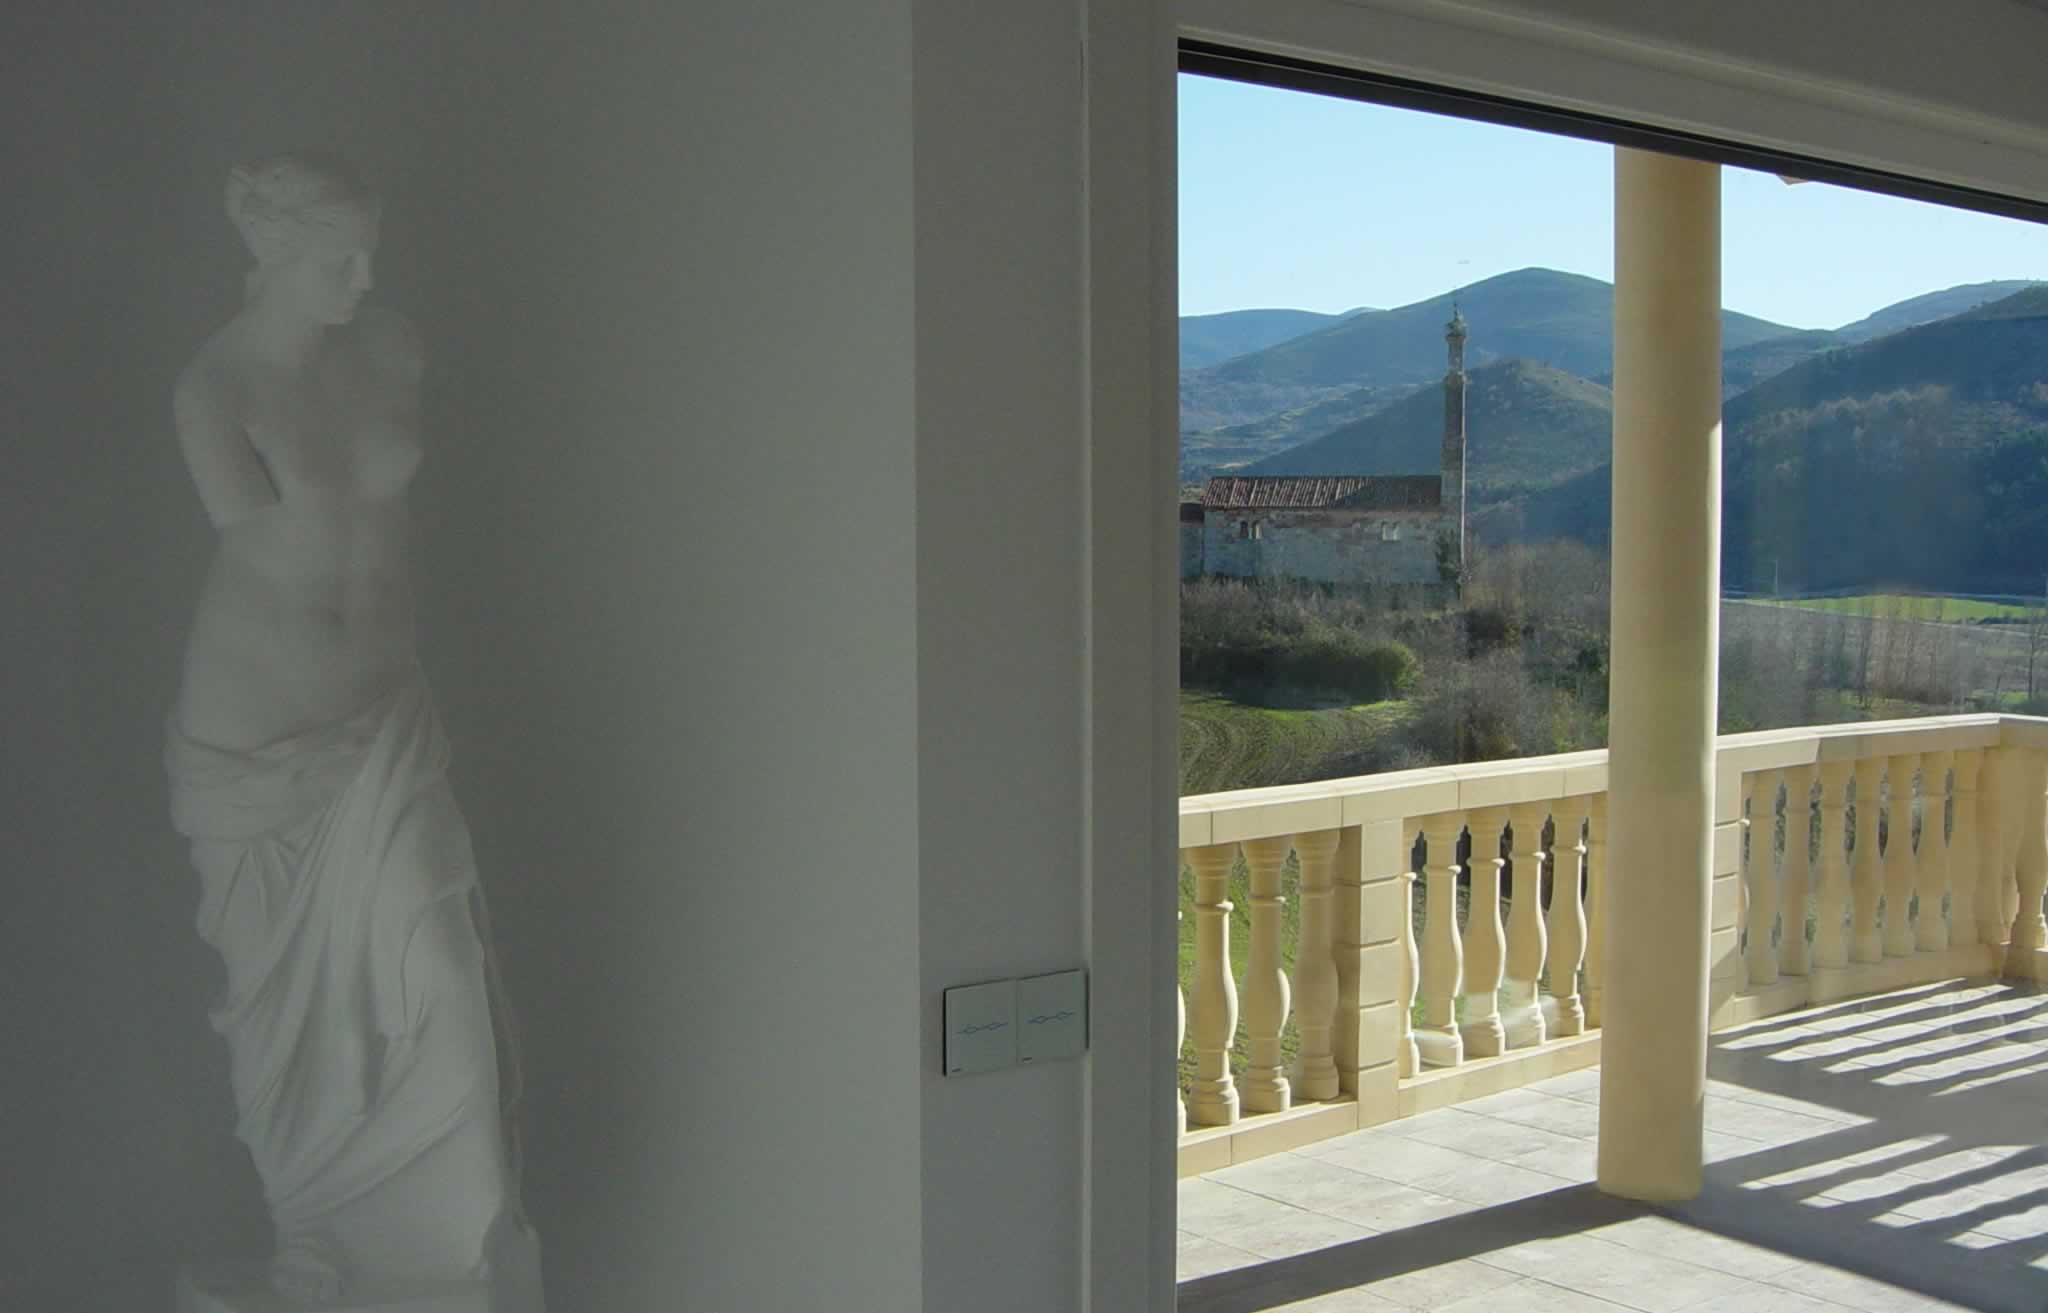 Countryside Villa Cottage for rent in Spain near La Rioja wineries